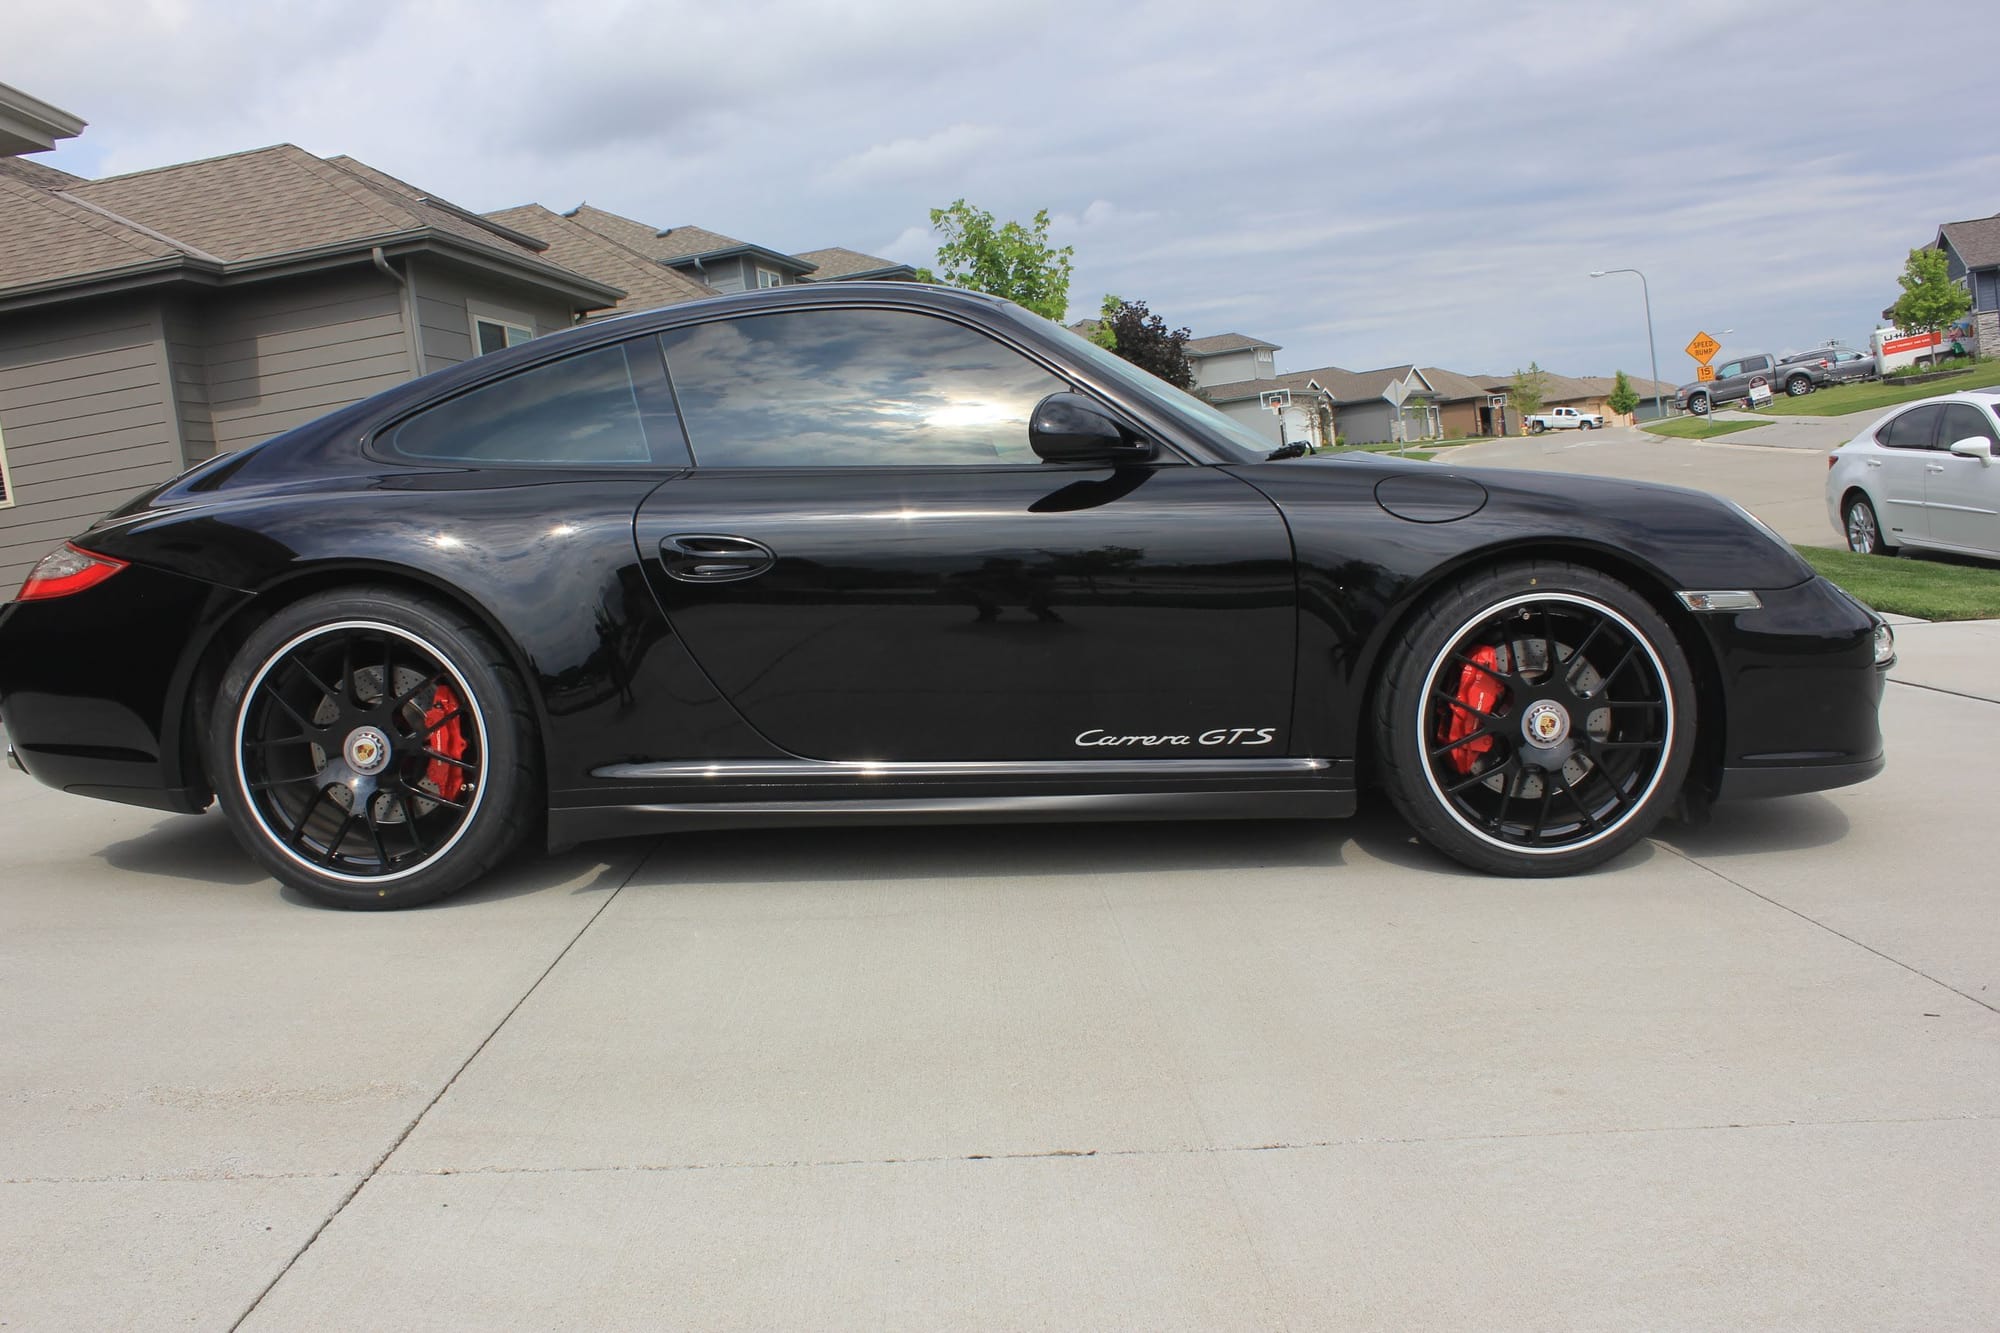 2011 Porsche 911 - 2011 Carrera GTS - Used - VIN WP0AB2A96BS721096 - 41,030 Miles - 6 cyl - 2WD - Automatic - Coupe - Black - Omaha, NE 68022, United States